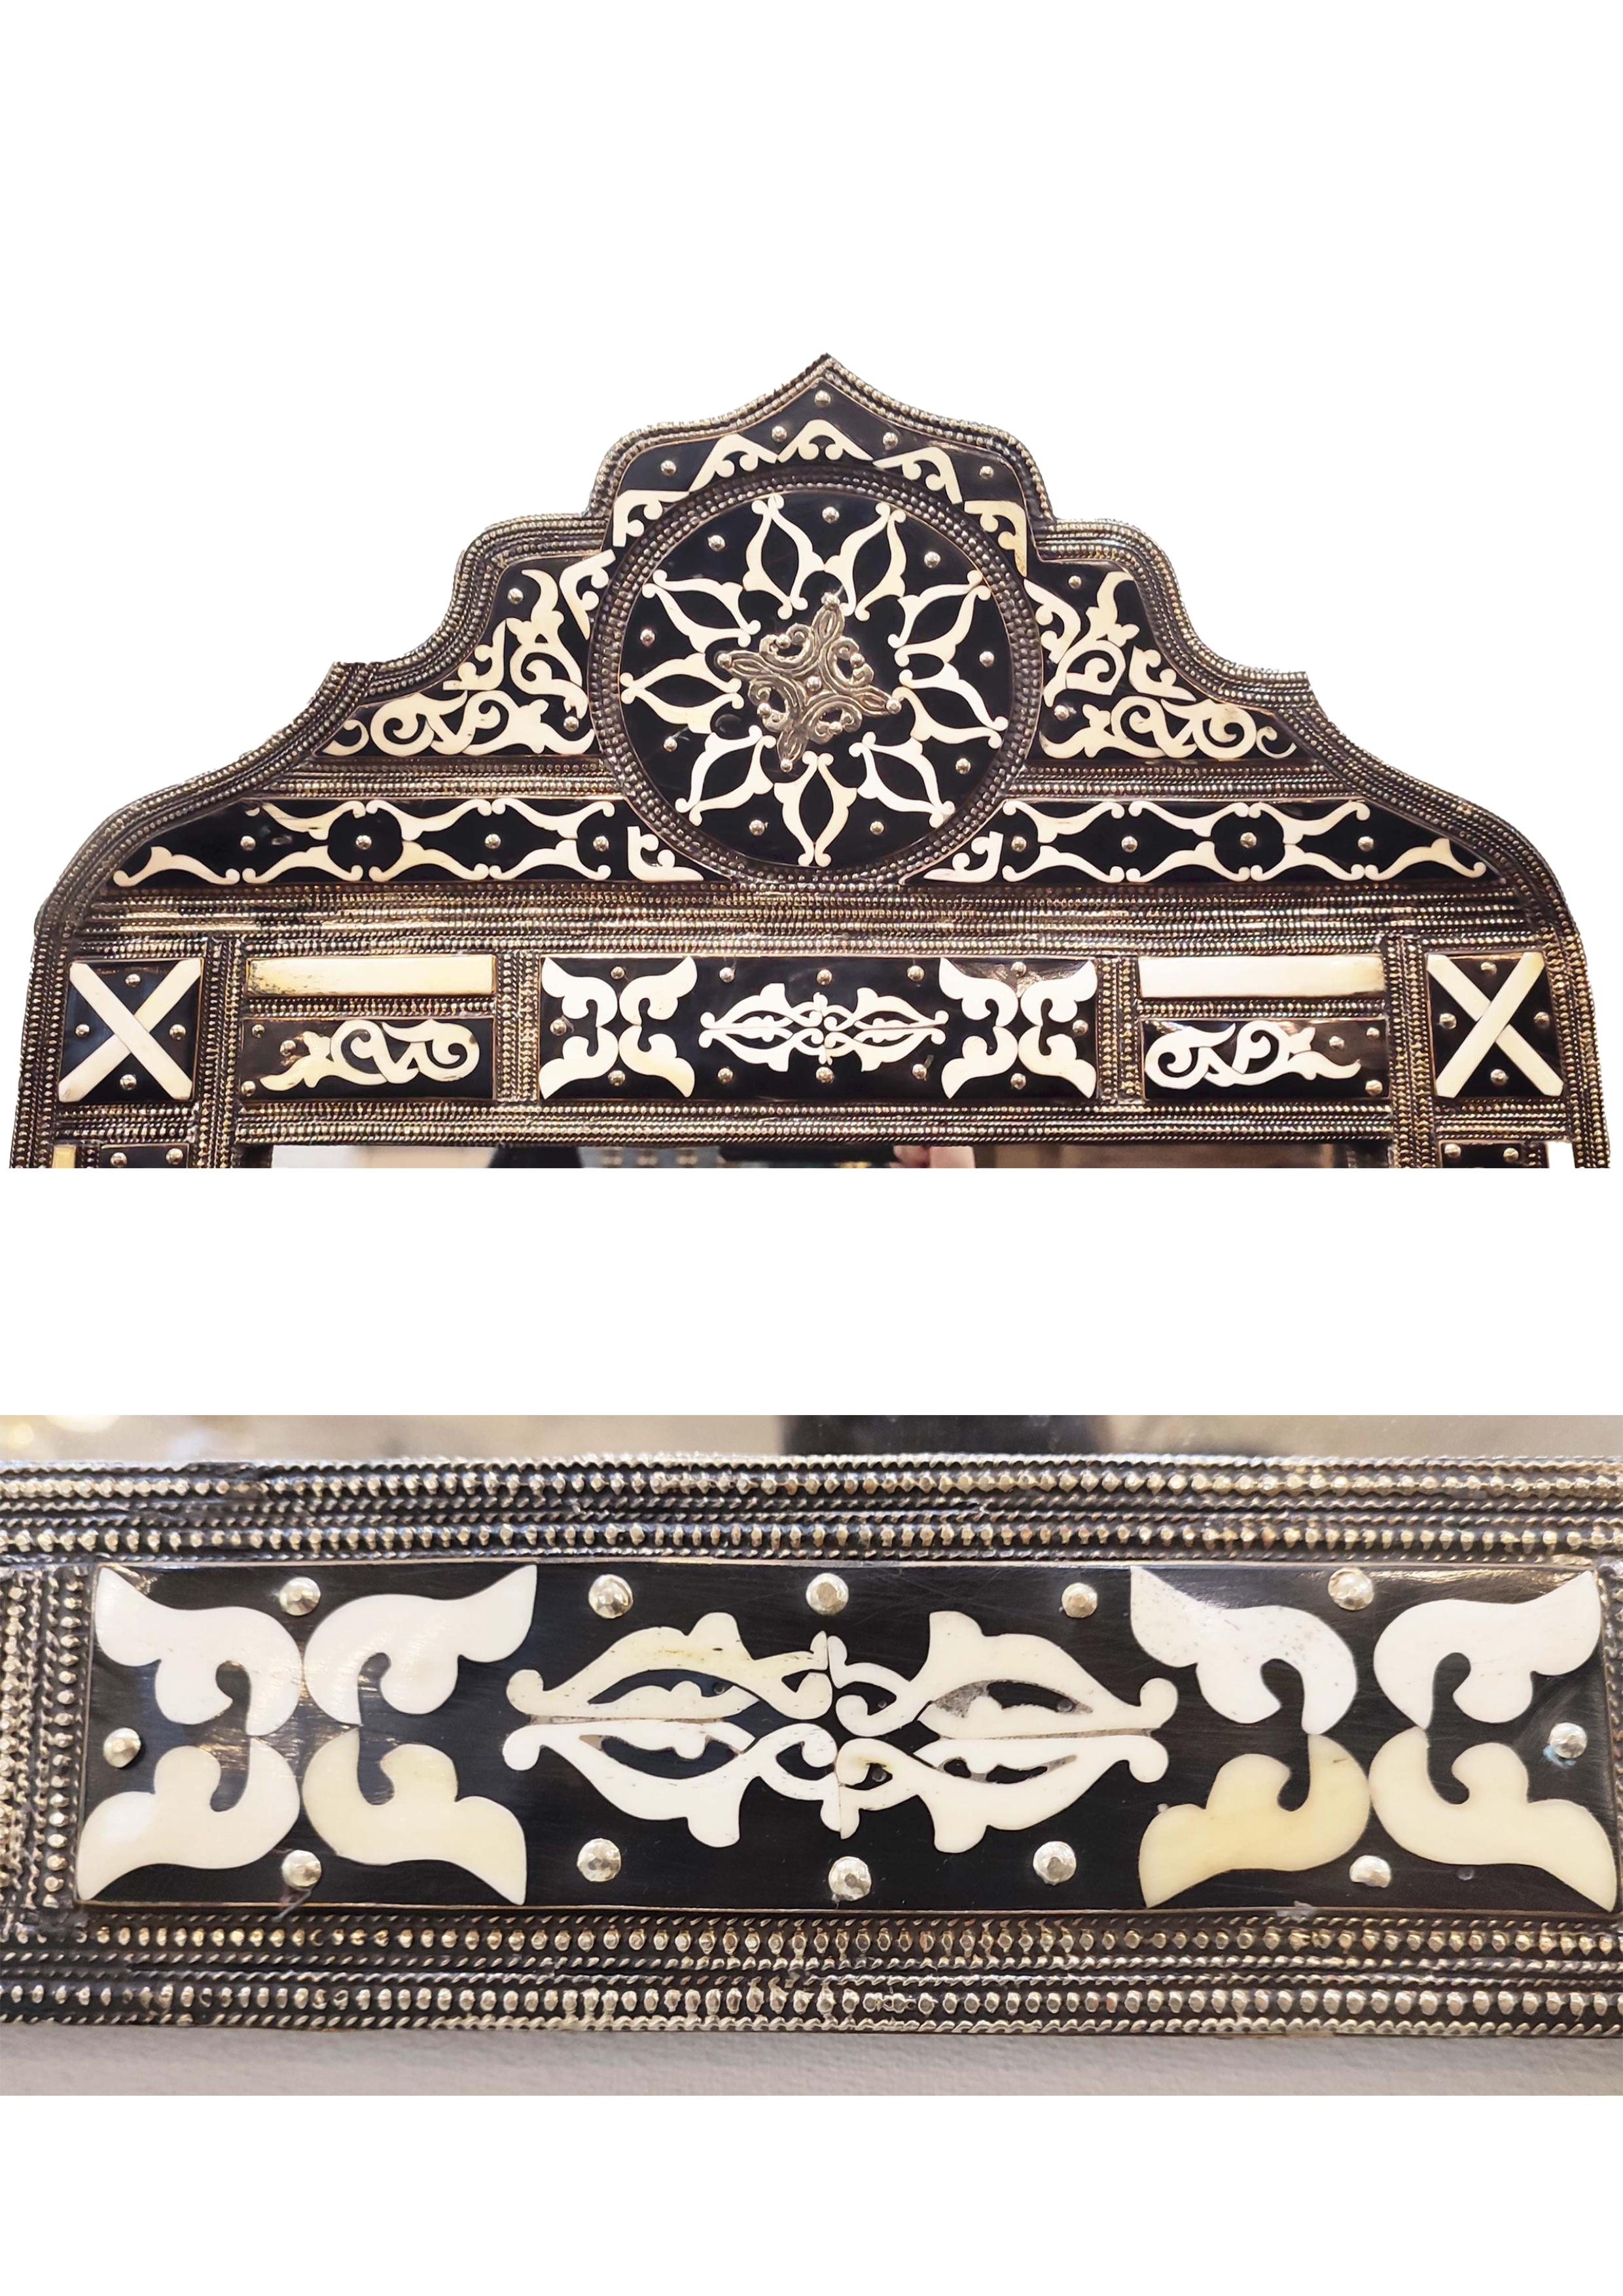 19th Century Damascene Syrian Mirror With Bone Inlay & Silvered Metal For Sale 2